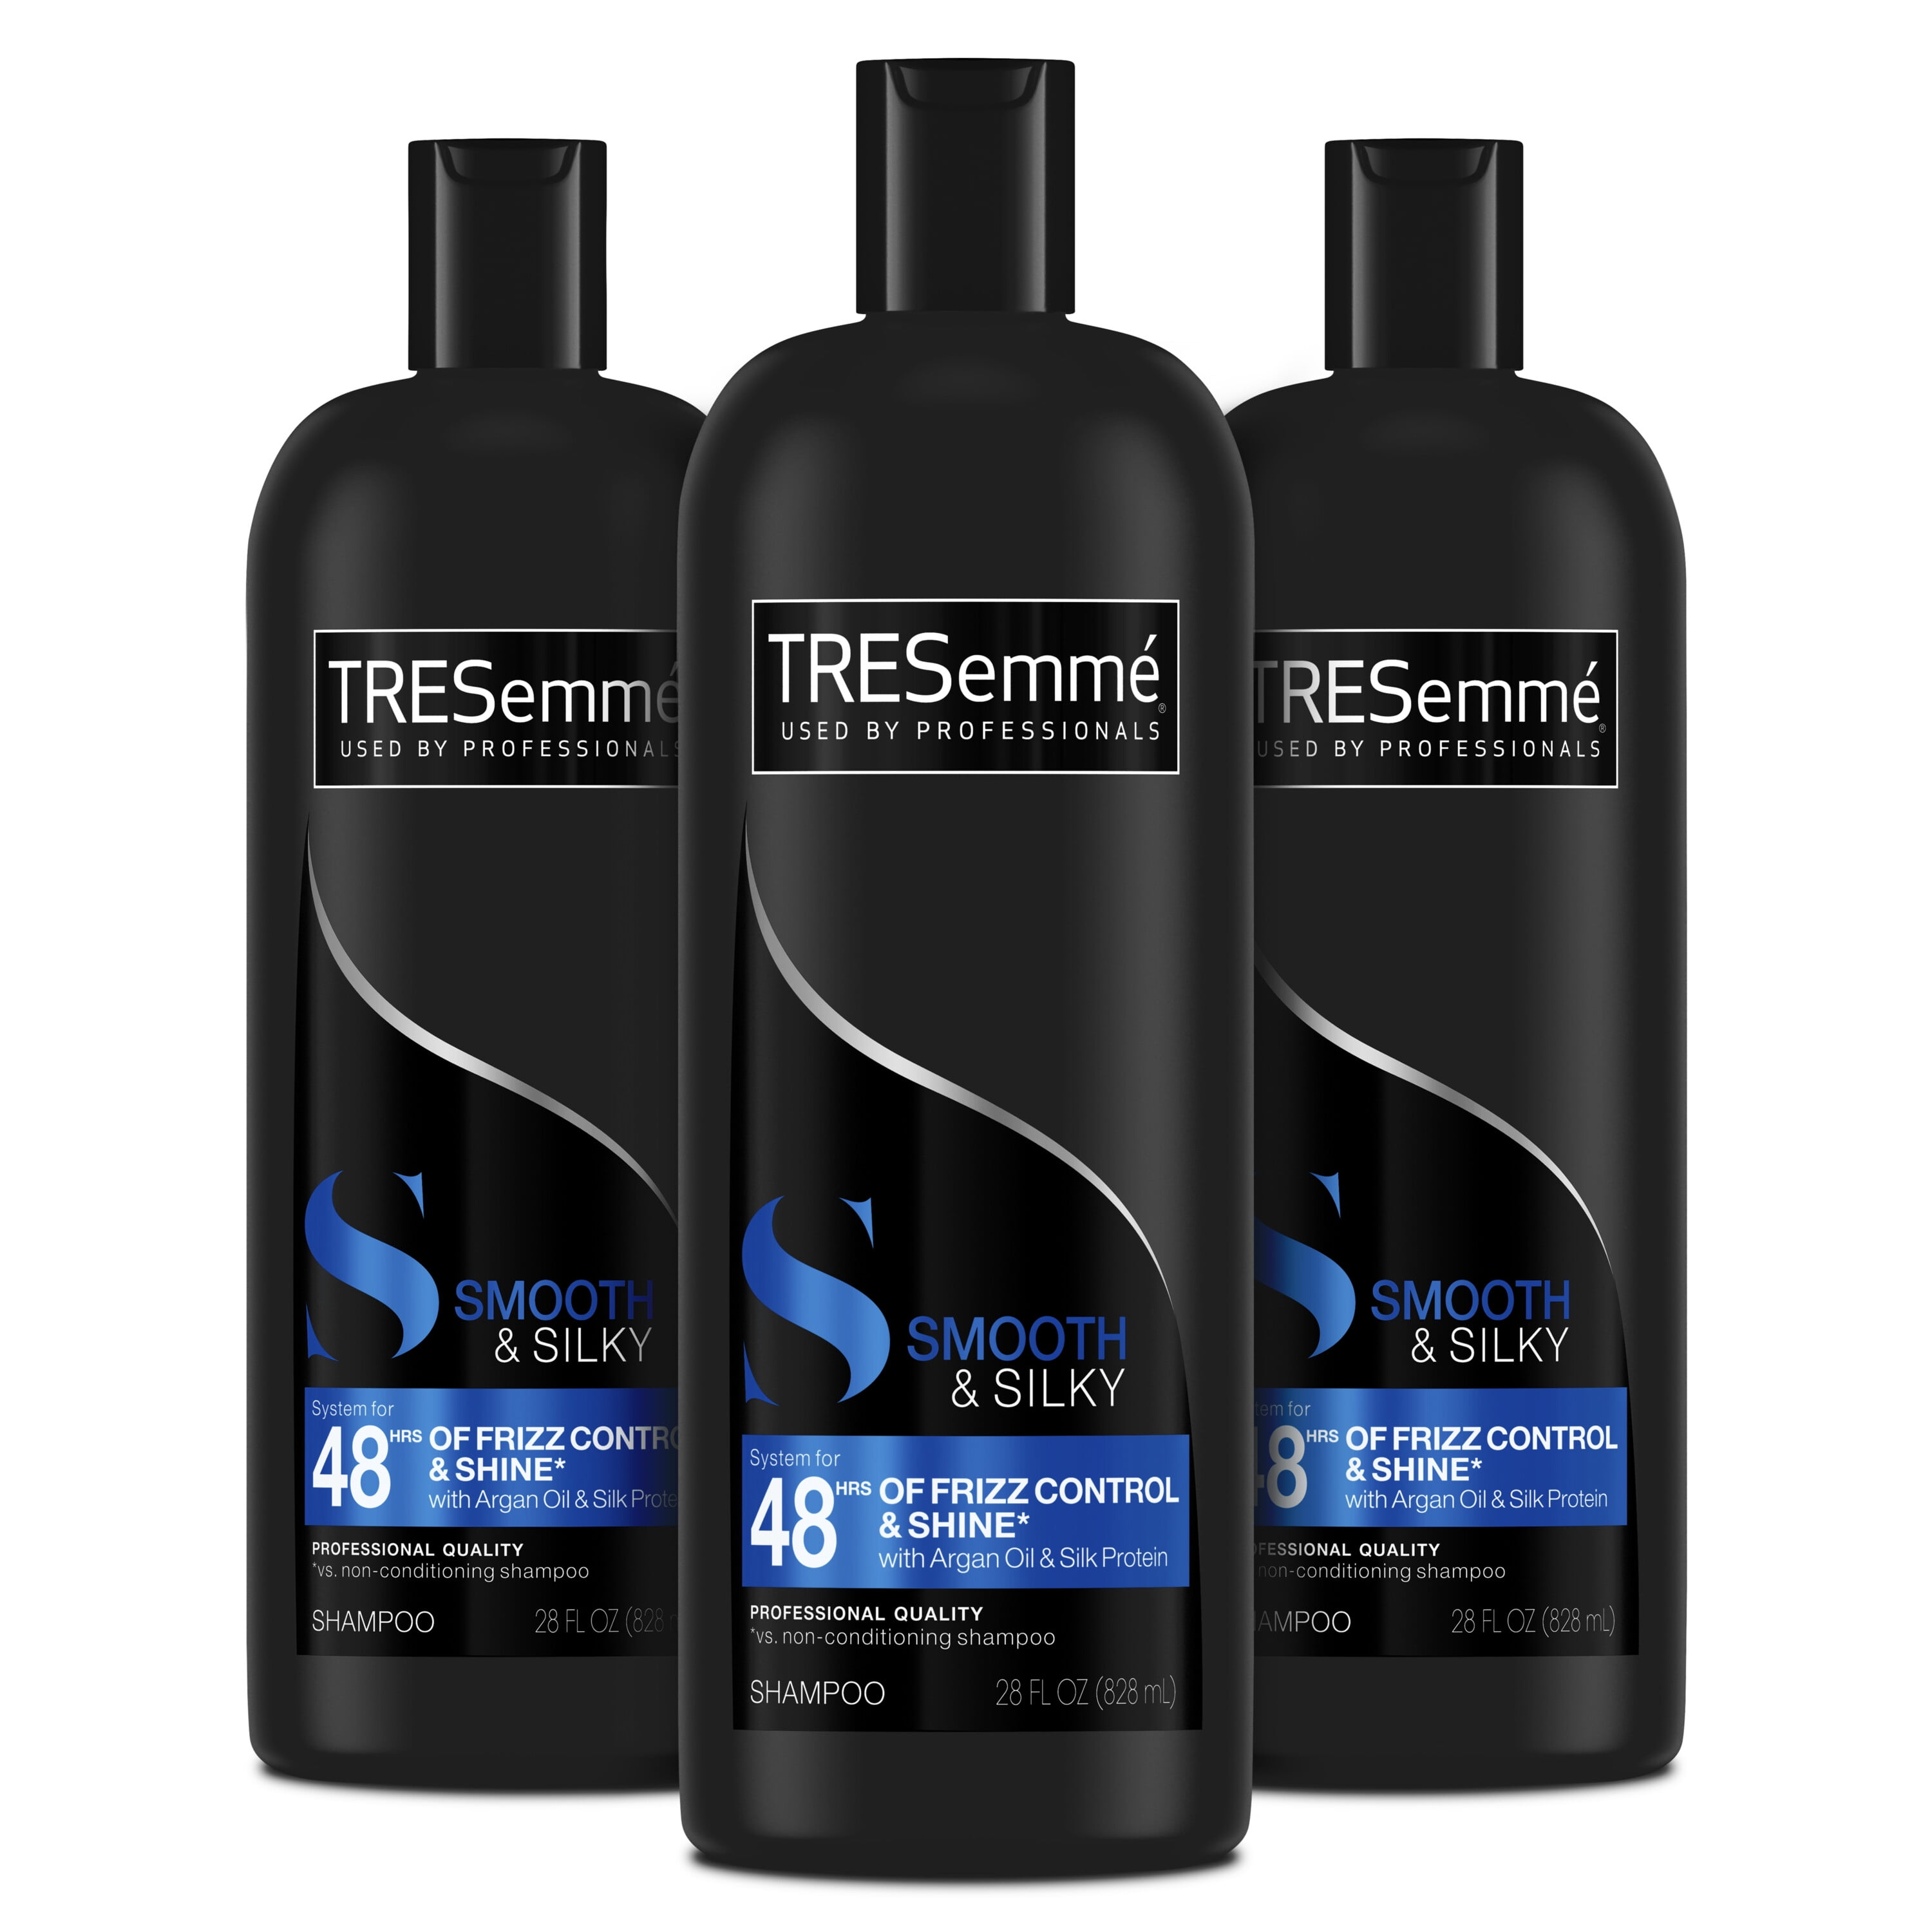 tresemme for dry rough hair szampon